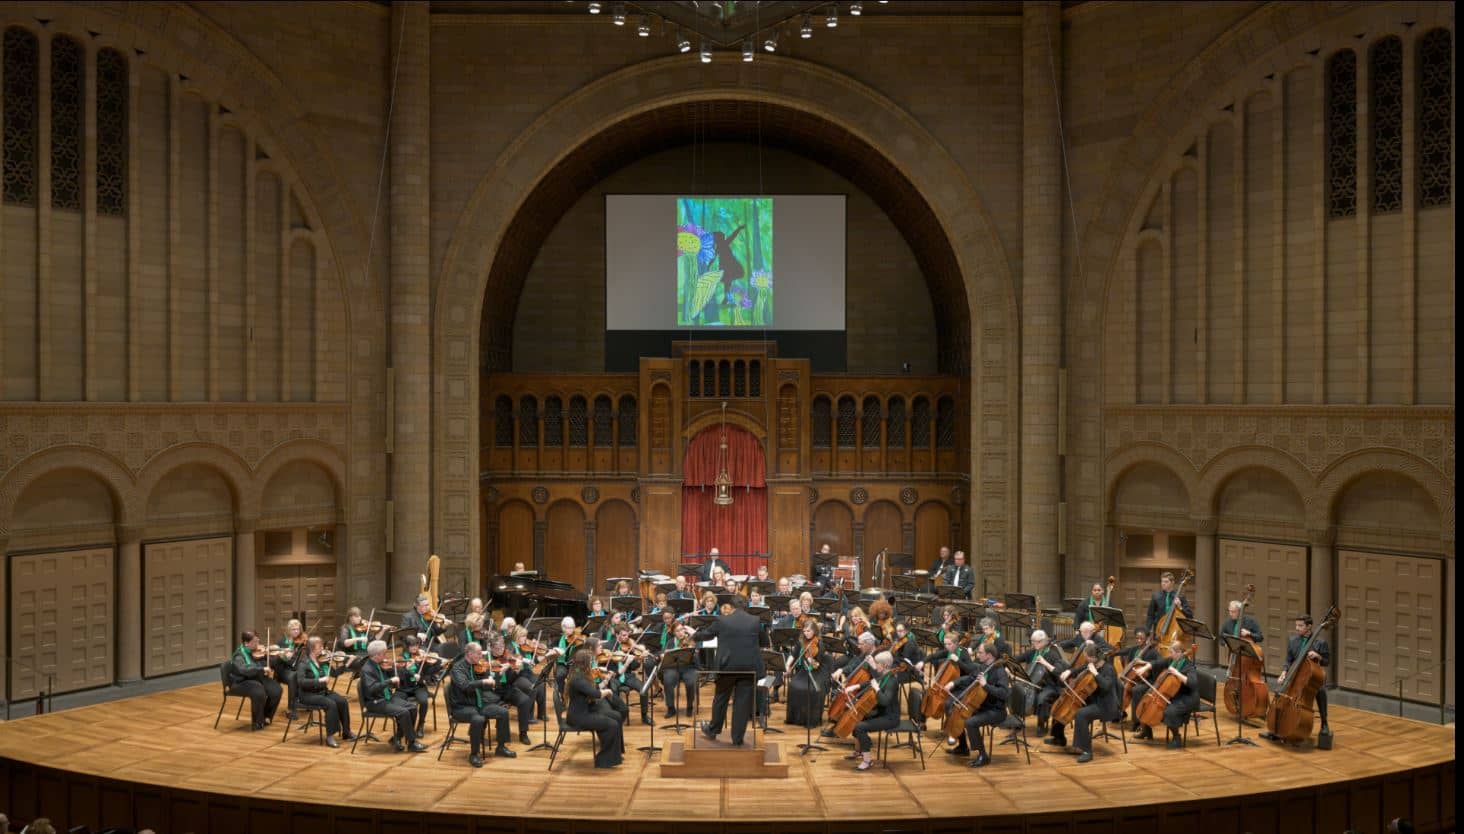 Orchestra performing with images drawn by child artists projected on screen above